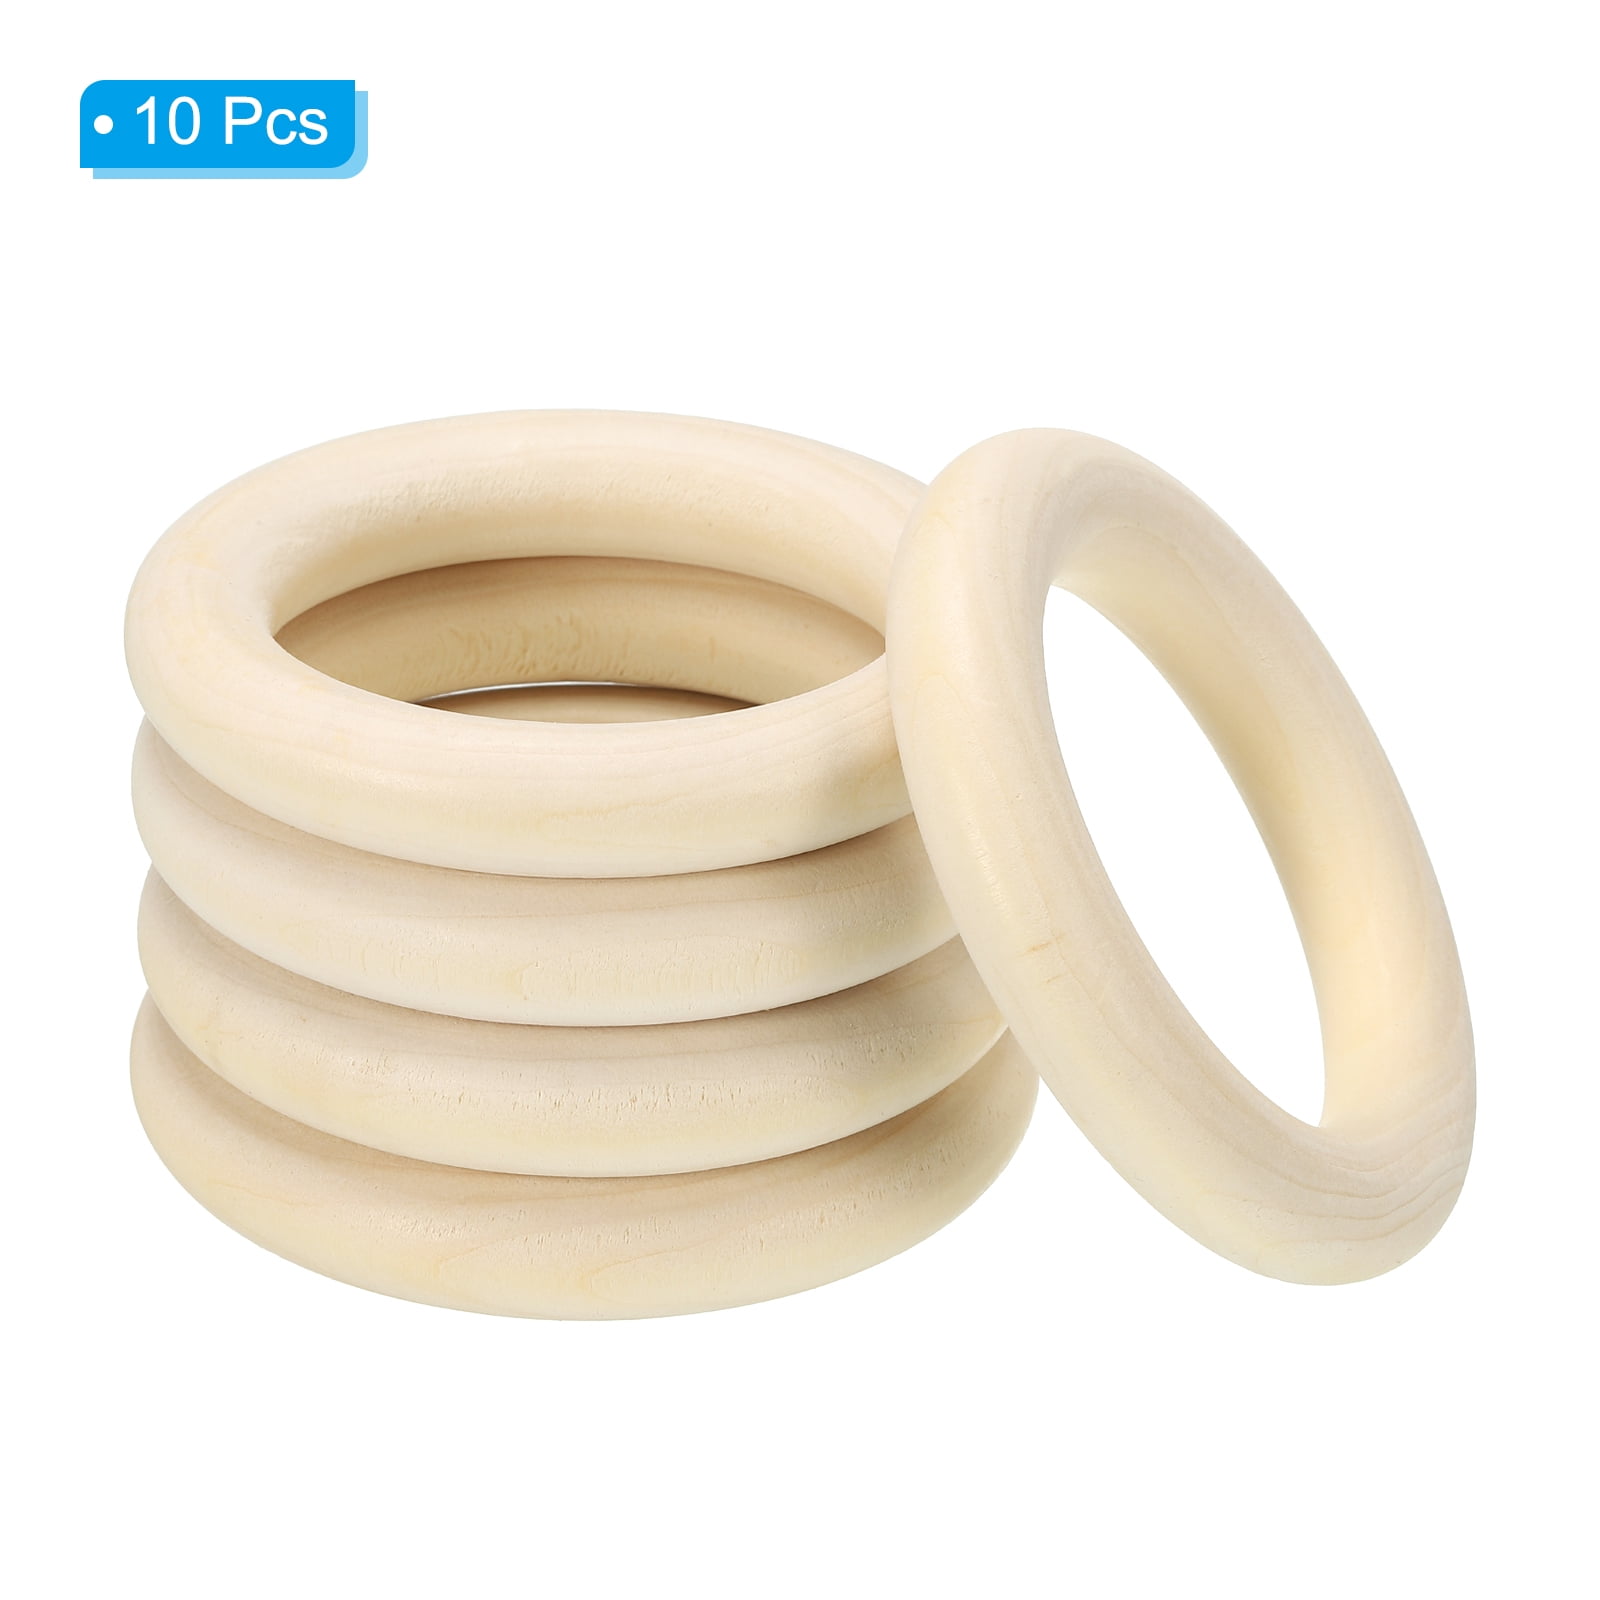  uxcell 1Pcs 125mm(5-inch) Natural Wood Rings, 15mm